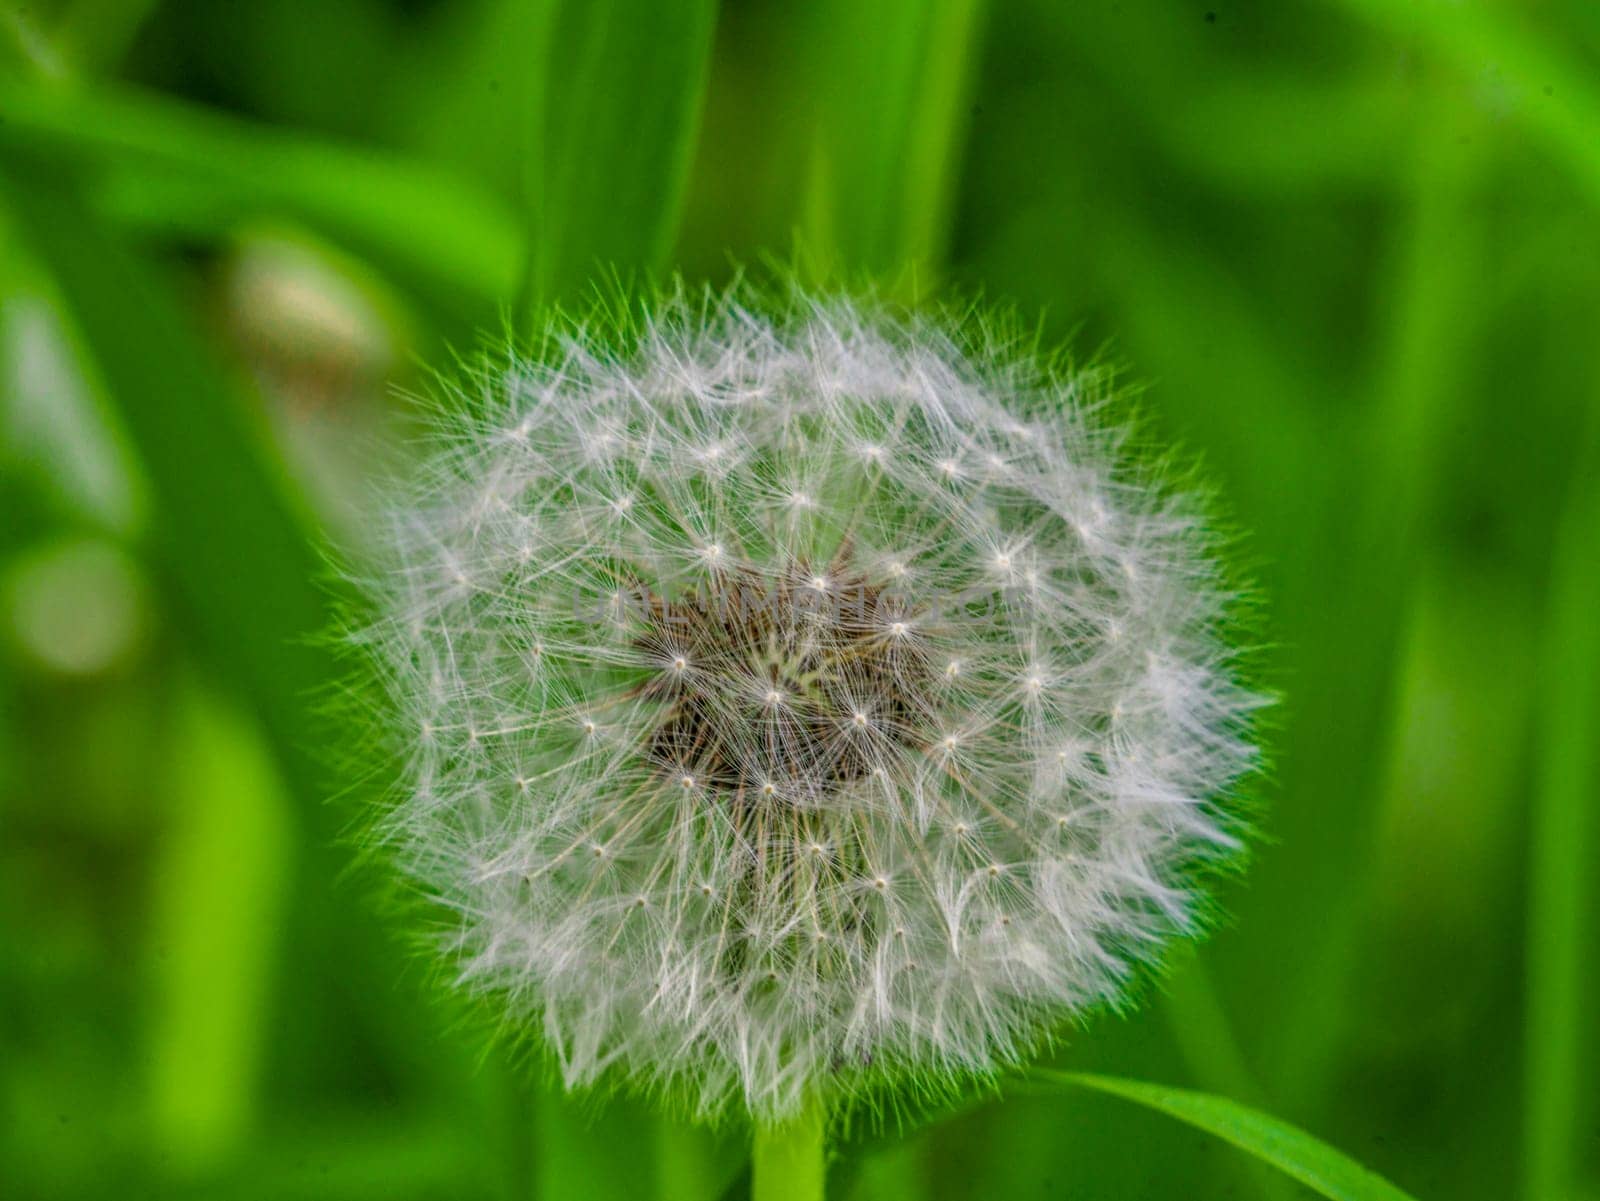 Dandelion close-up, on a blurred background by lempro